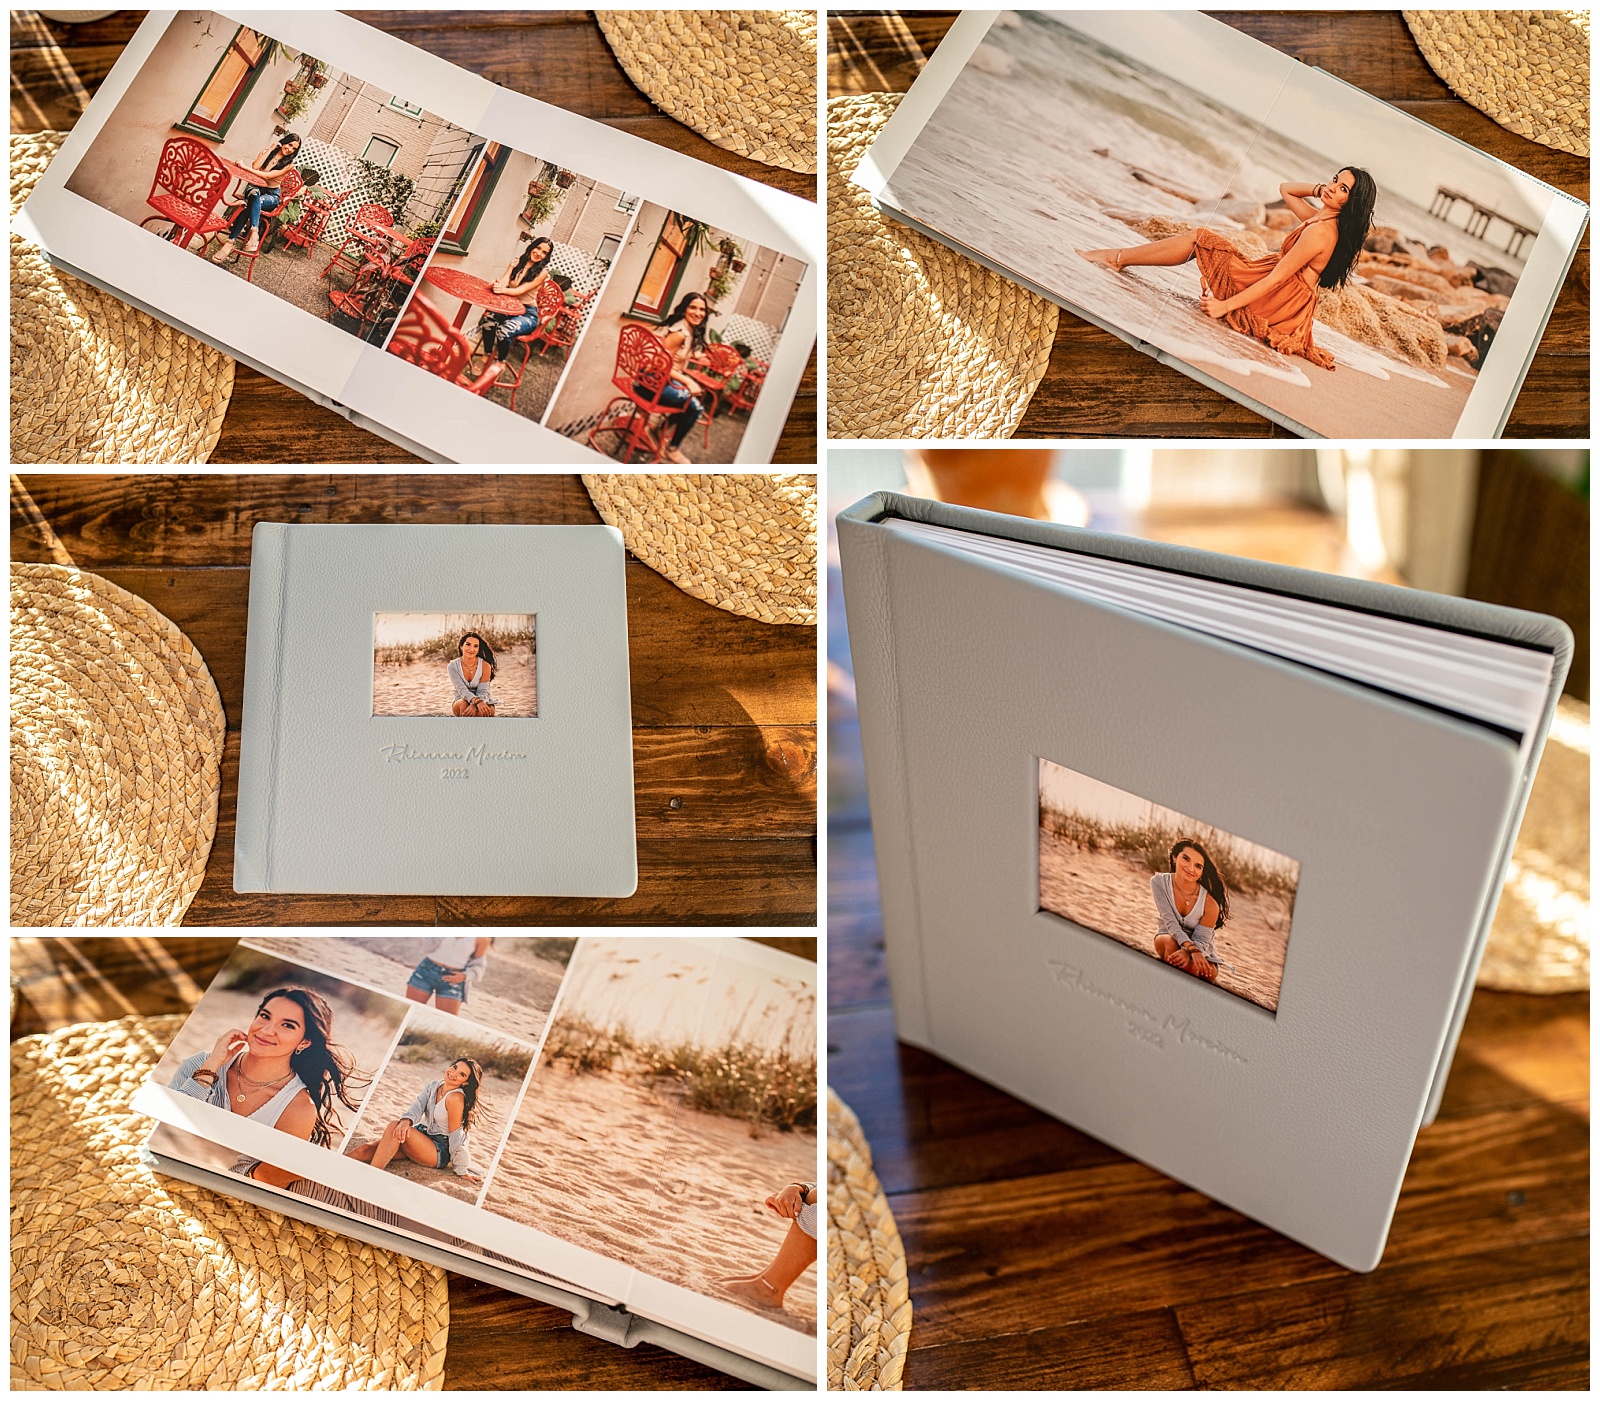 Senior portrait artwork with custom album showing your favorite images from your senior photography experience.